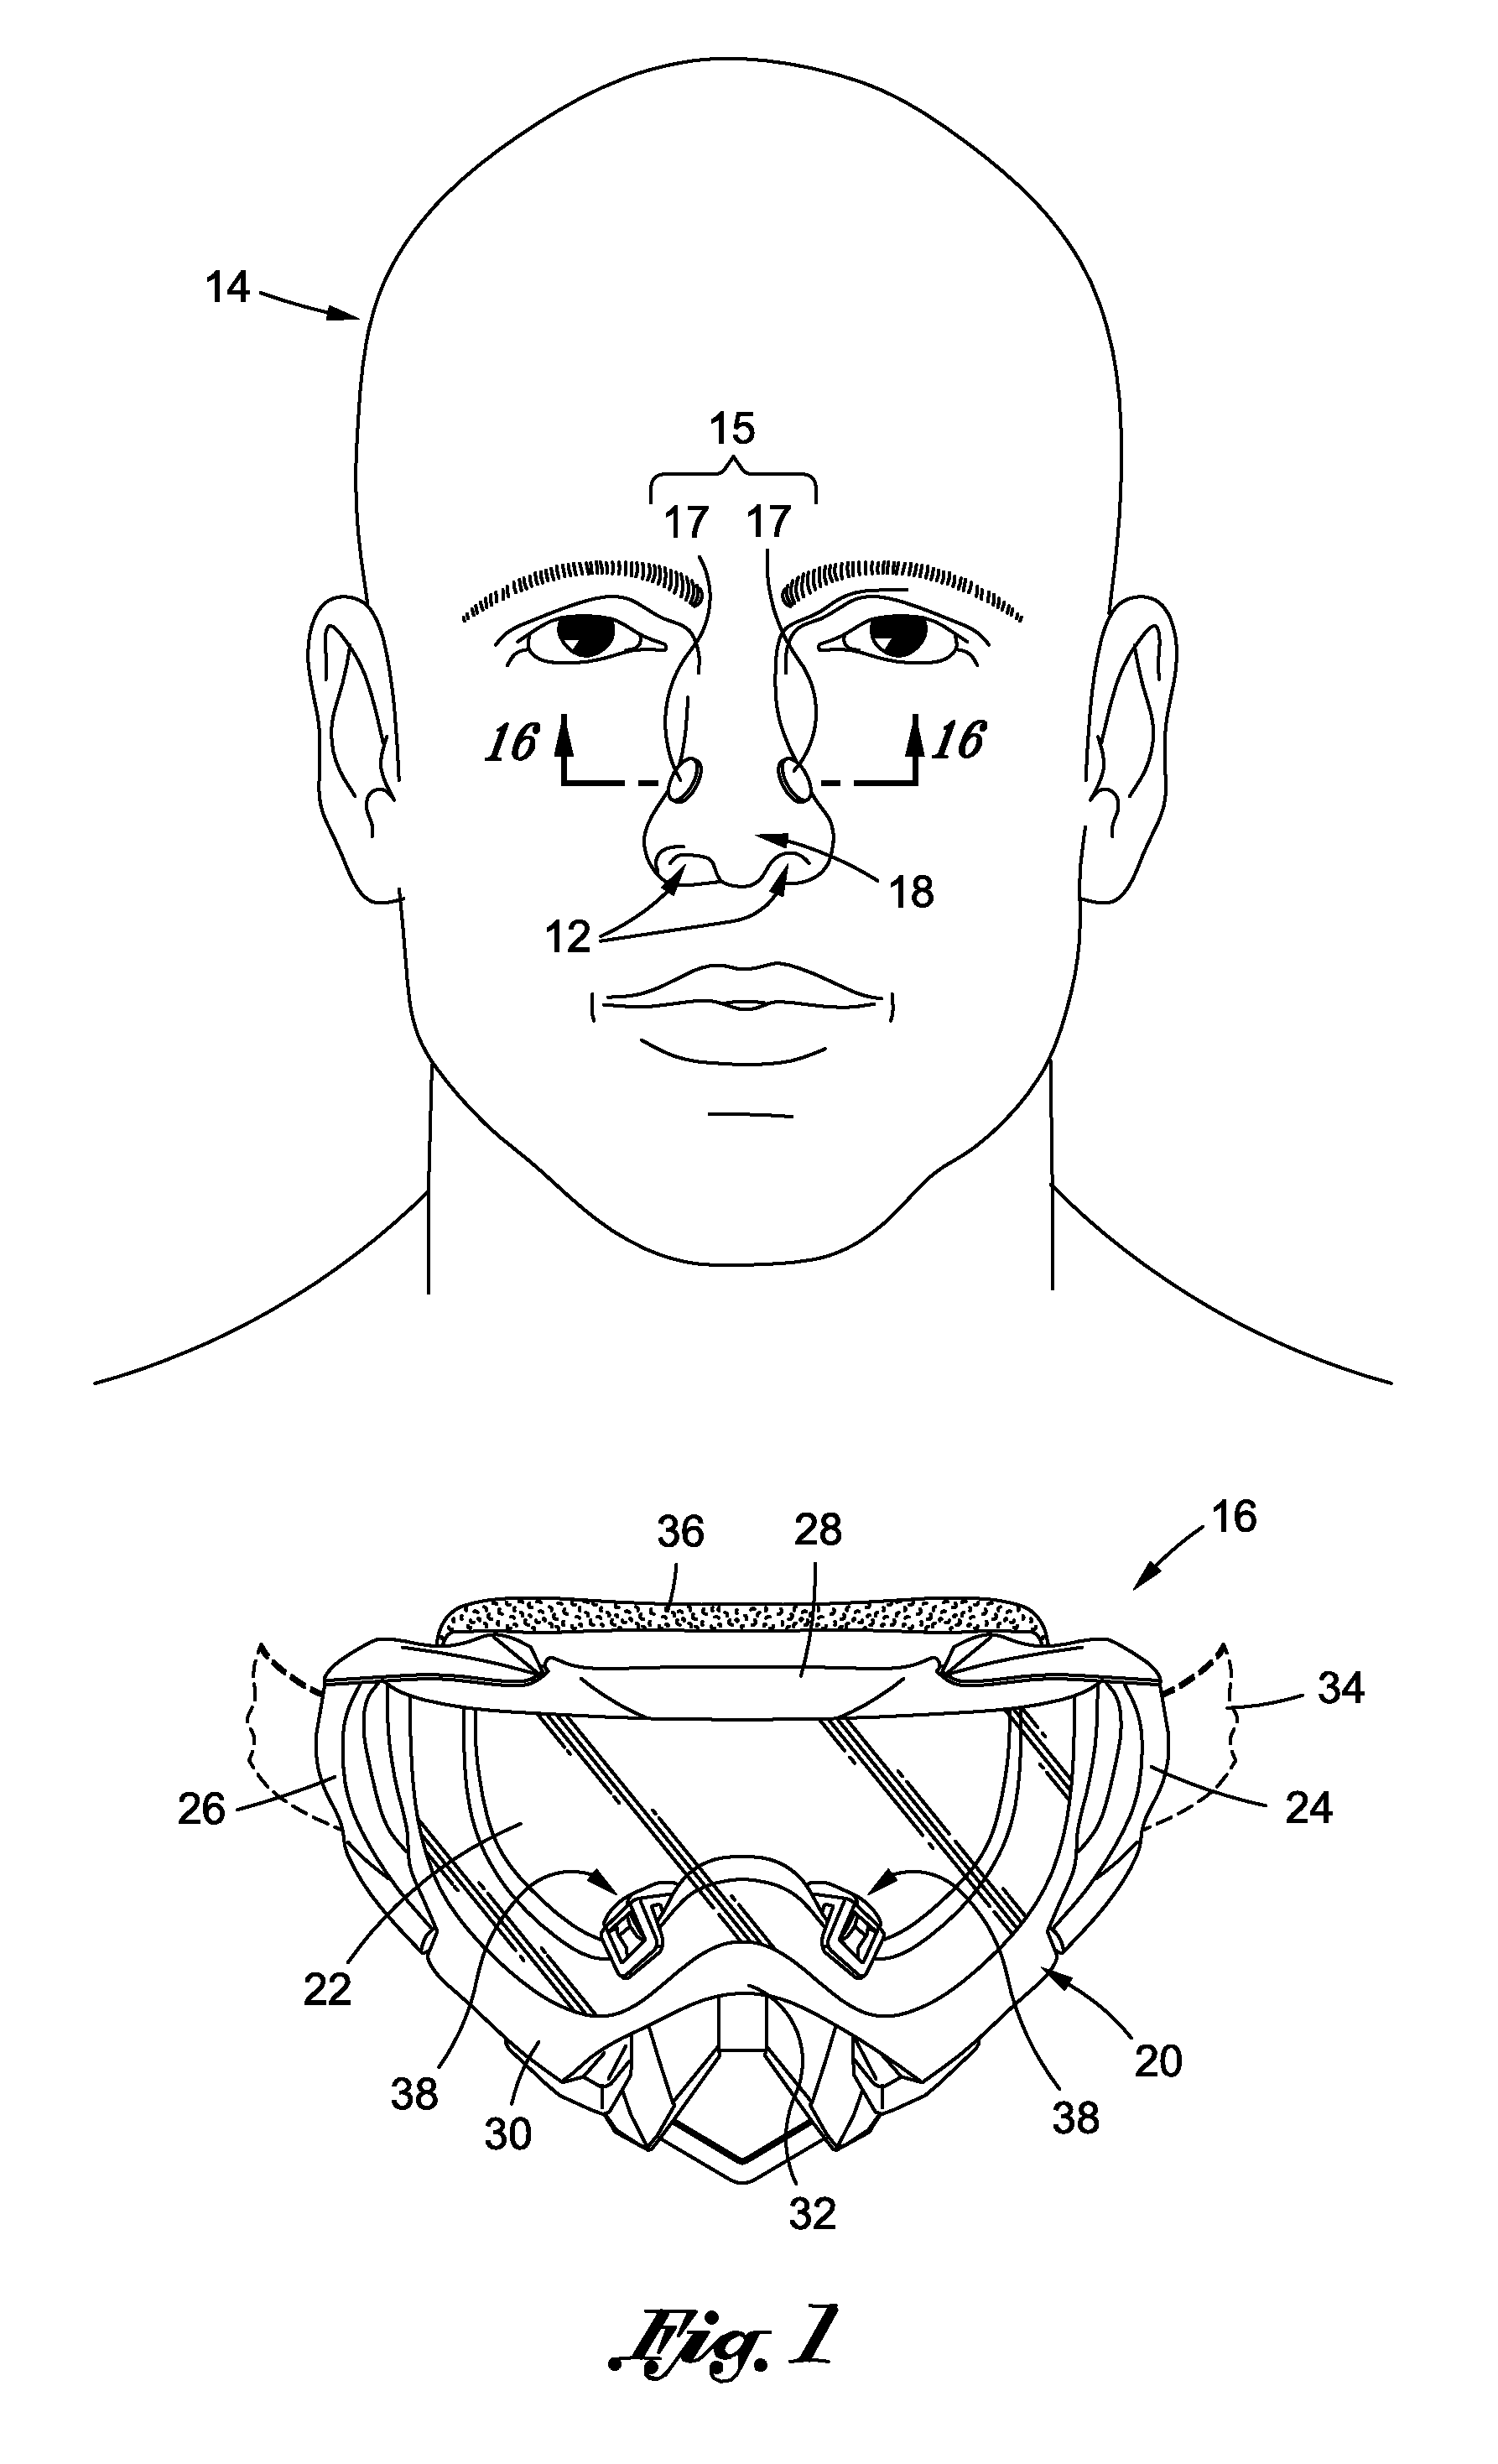 Goggle breathing system